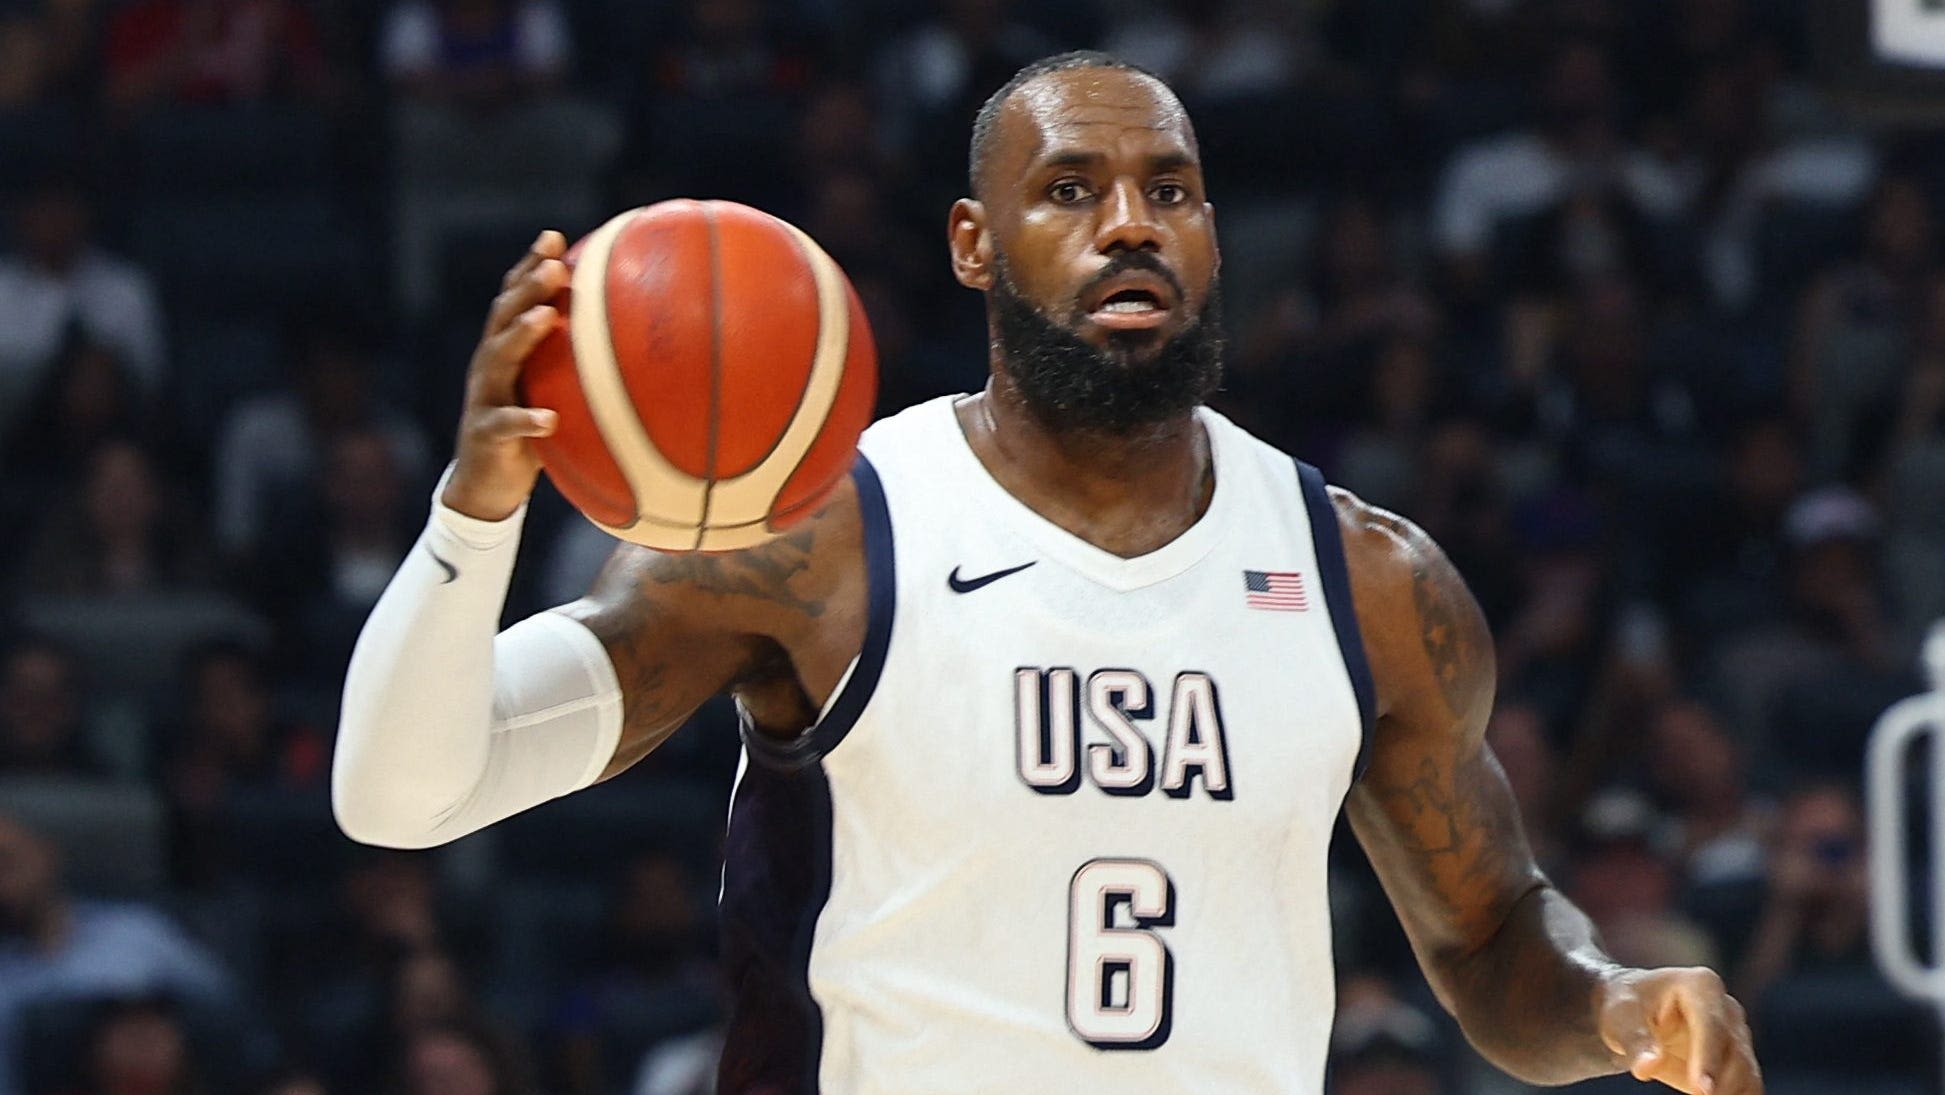 How to watch Team USA vs Germany basketball today: Time, TV channel, streaming information